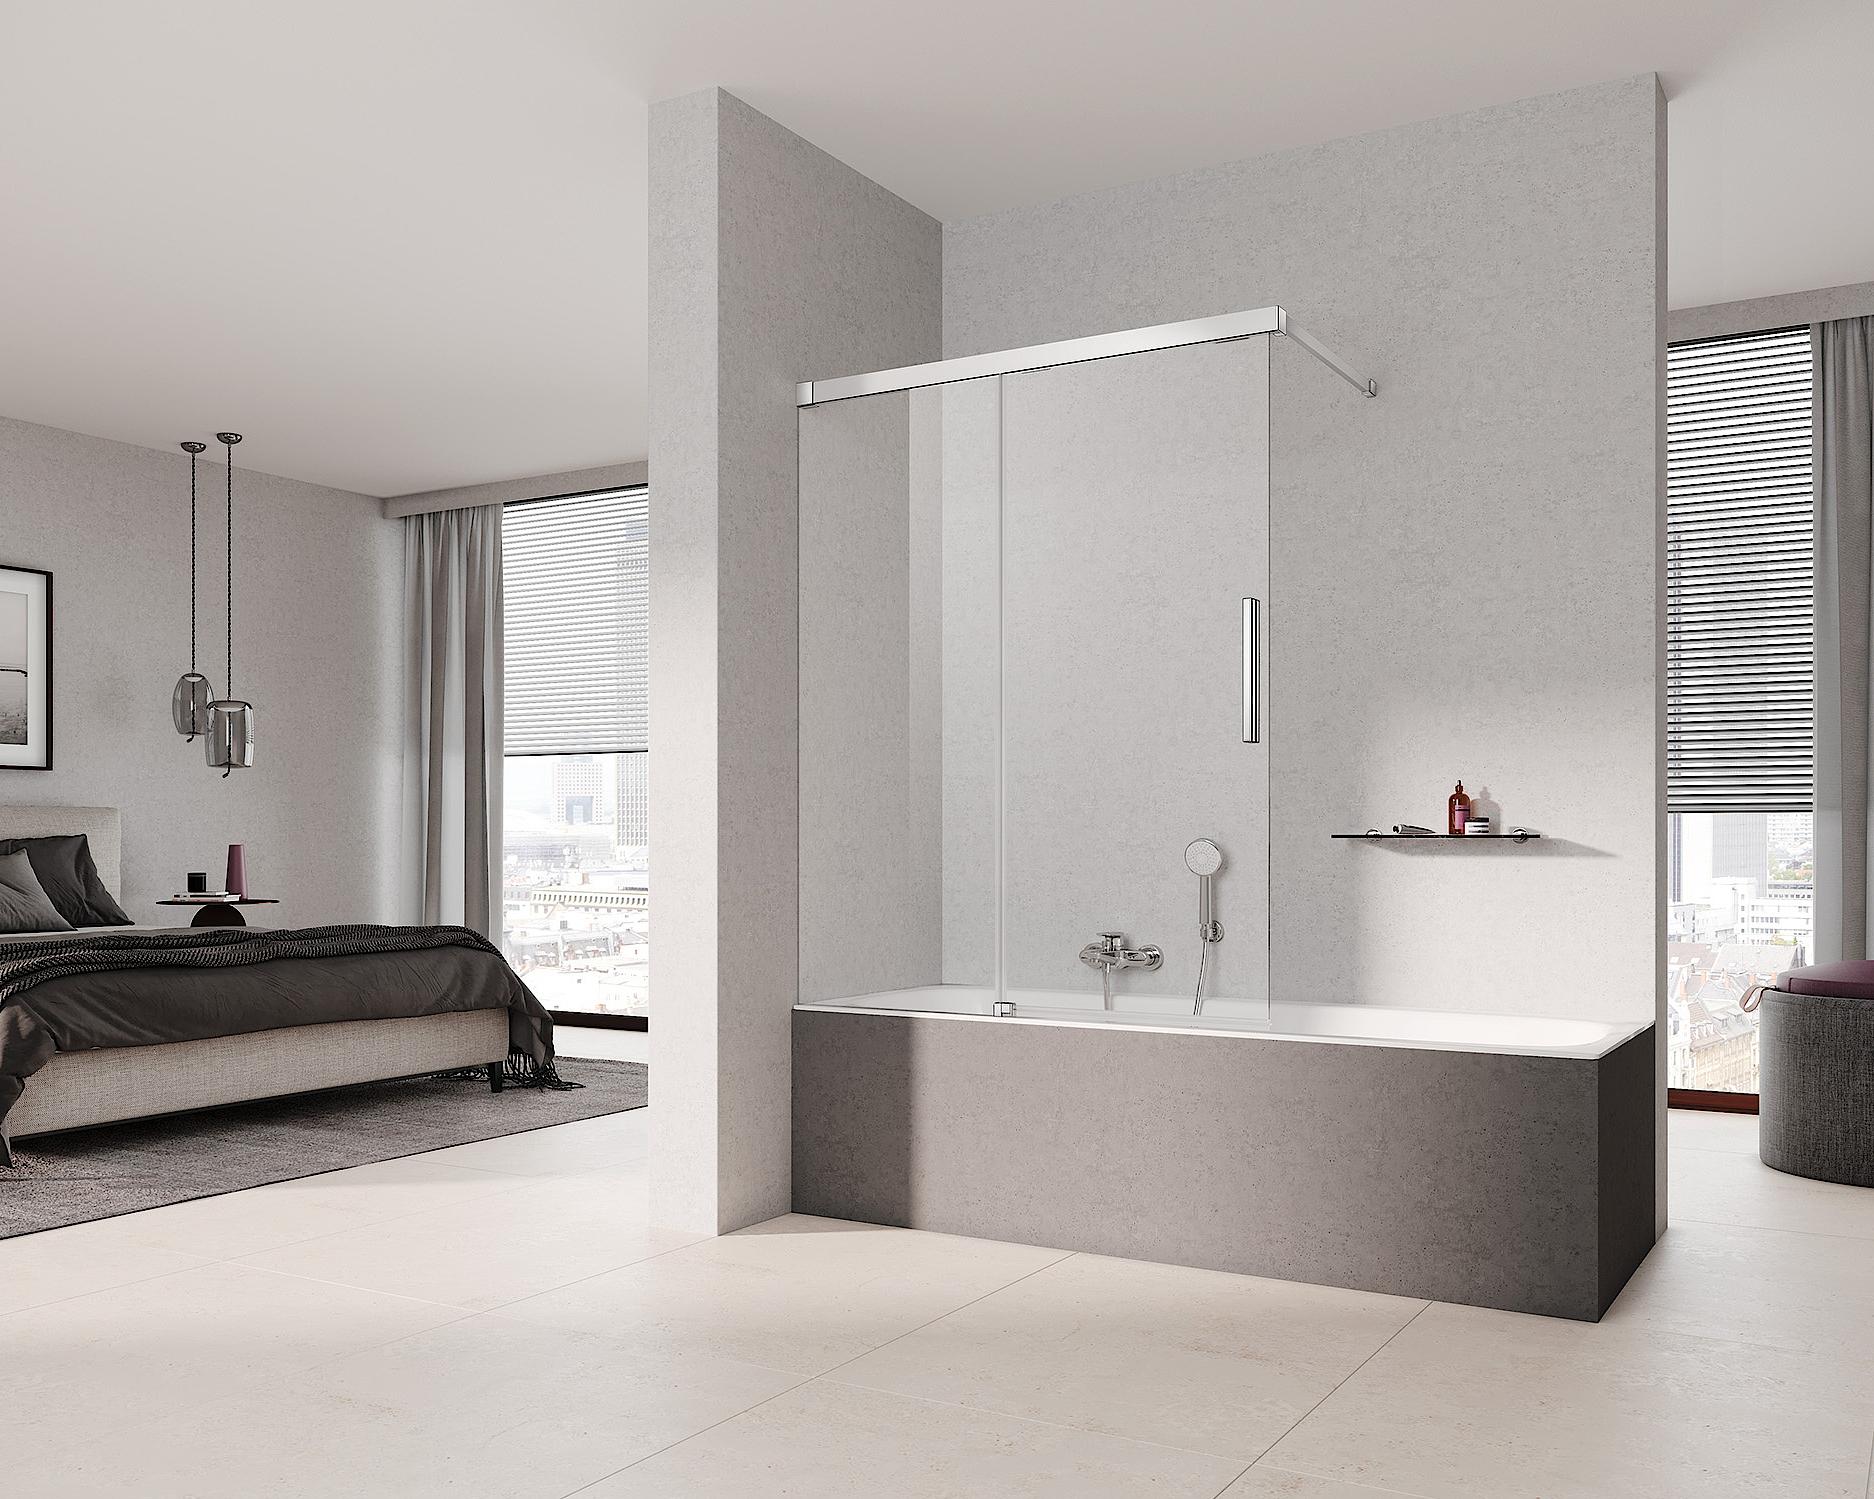 Kermi profile shower enclosure, NICA two-part sliding door with fixed panel without wall profile